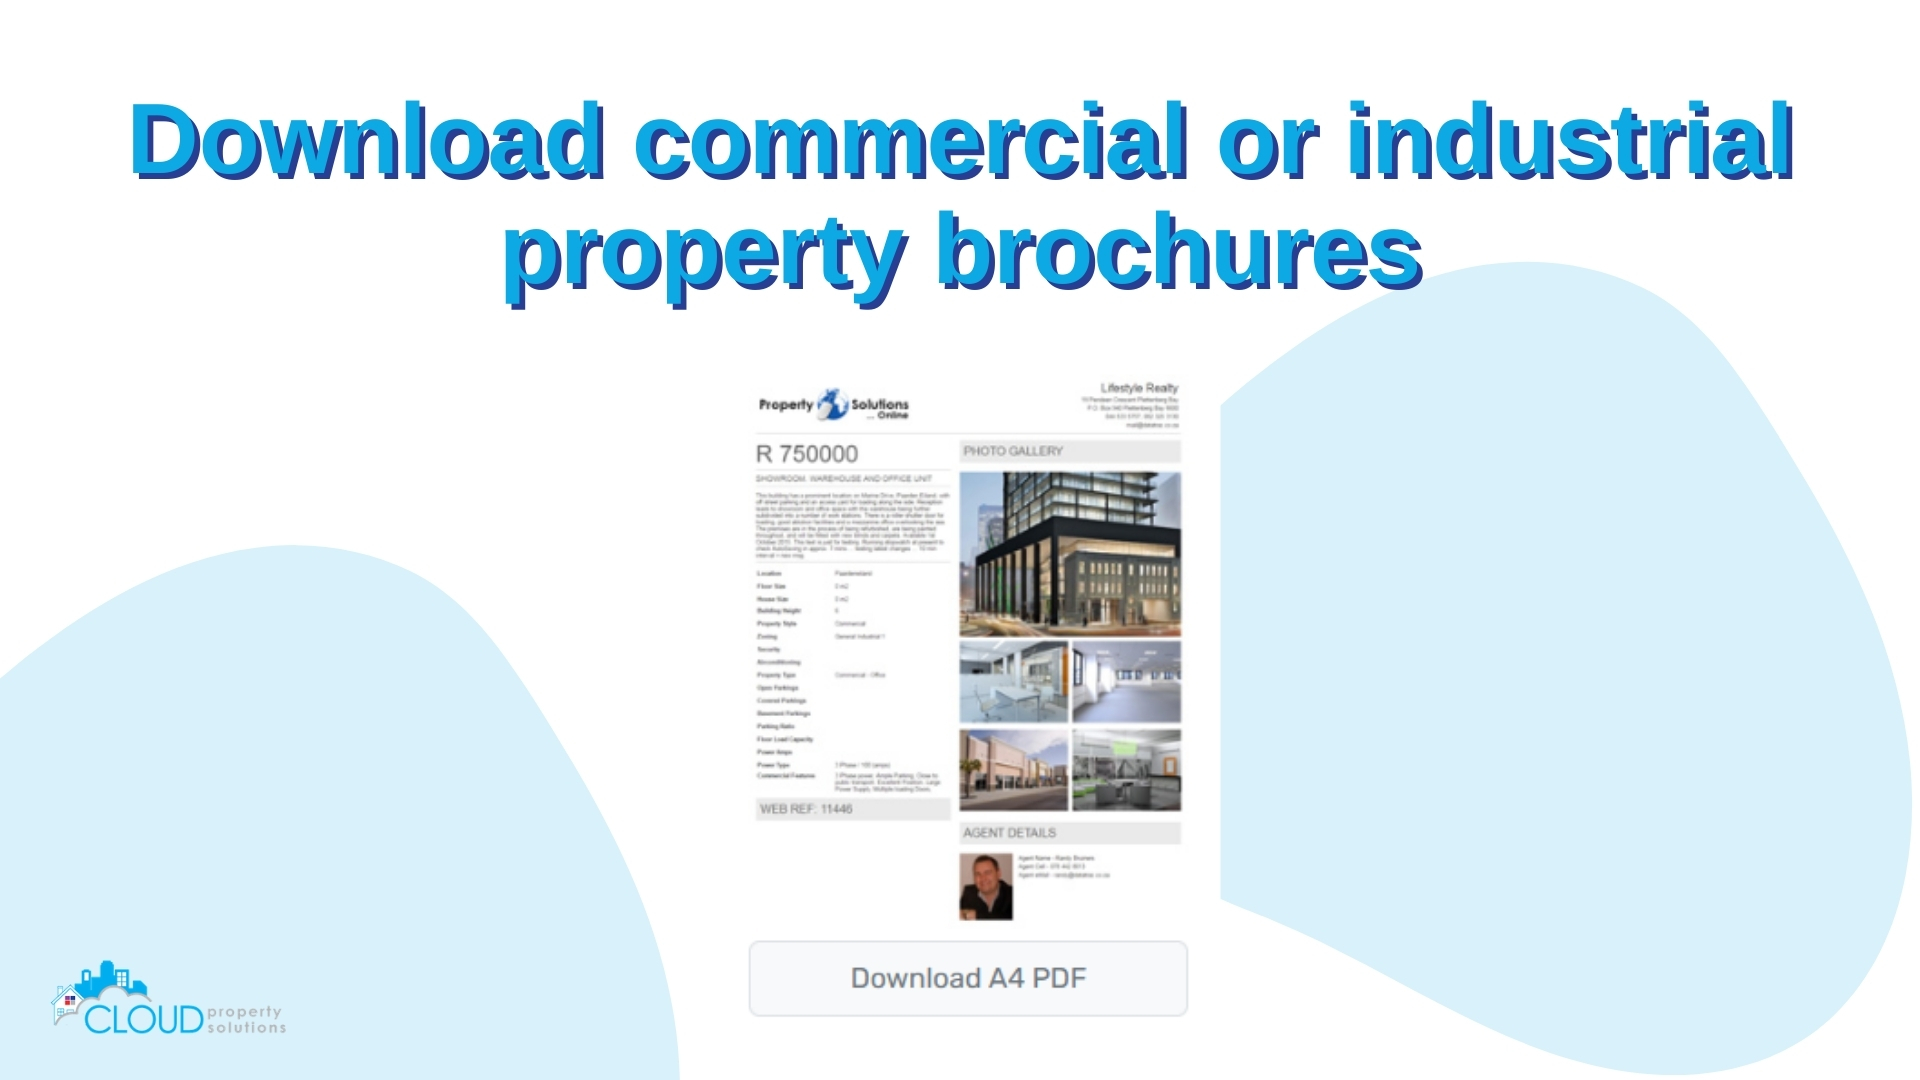 Download property brochures using the templates provided